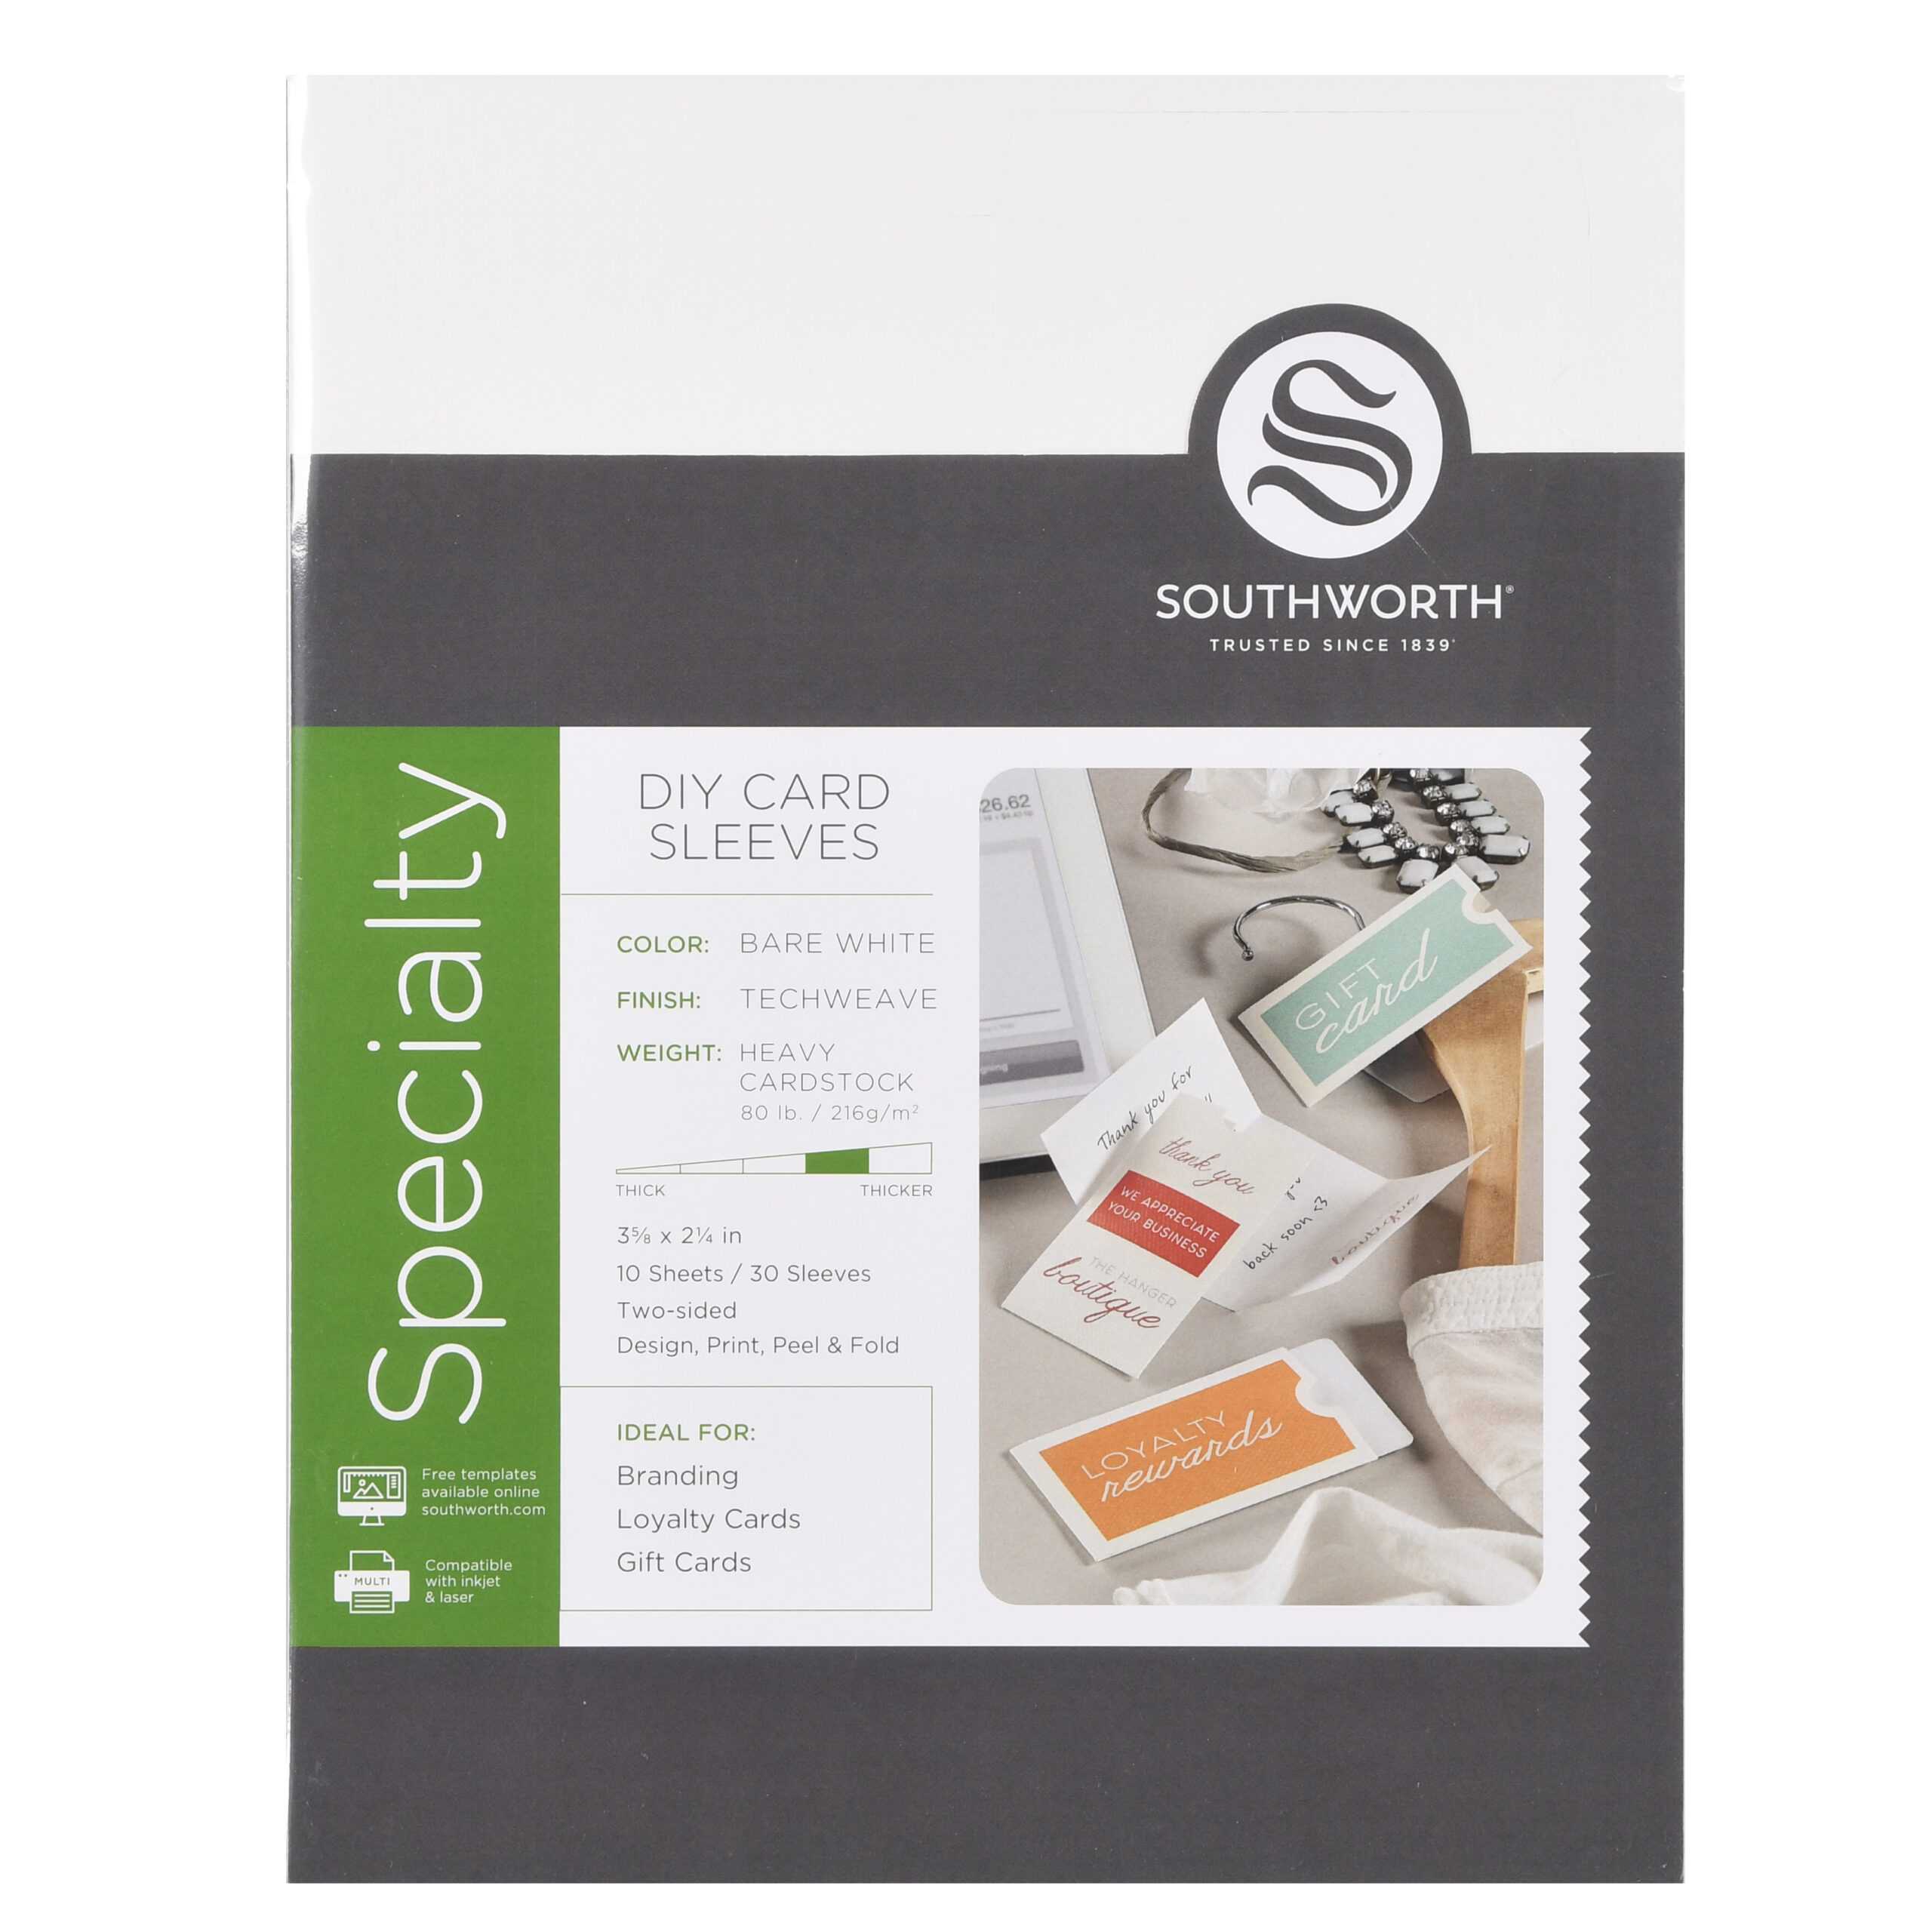 Southworth Diy Card Sleeves, 3.6" X 2.25", 80 Lb., Techweave Finish, Bare  White, 30 Ct. – Walmart With Regard To Southworth Business Card Template